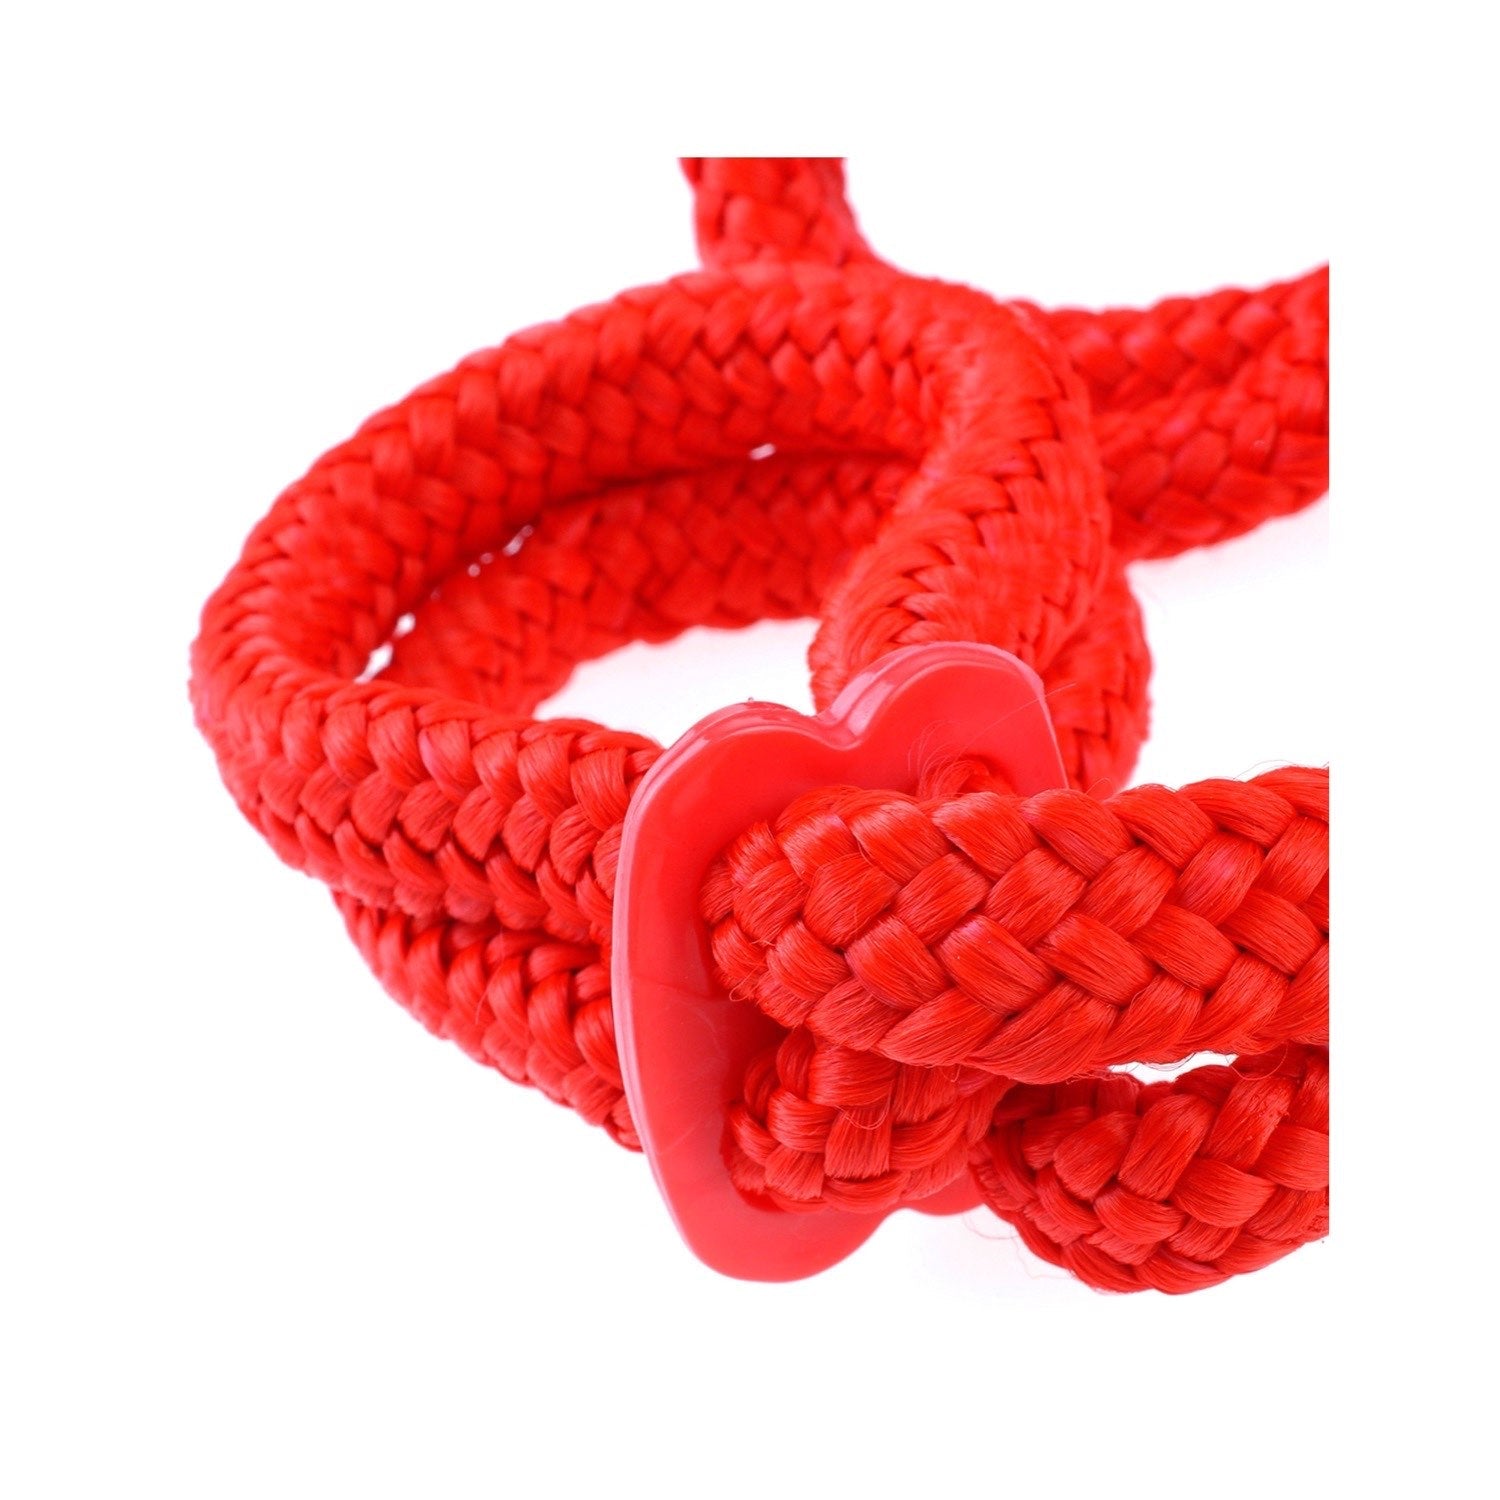 Fetish Fantasy Series Silk Rope Love Cuffs - Red Restraints by Pipedream